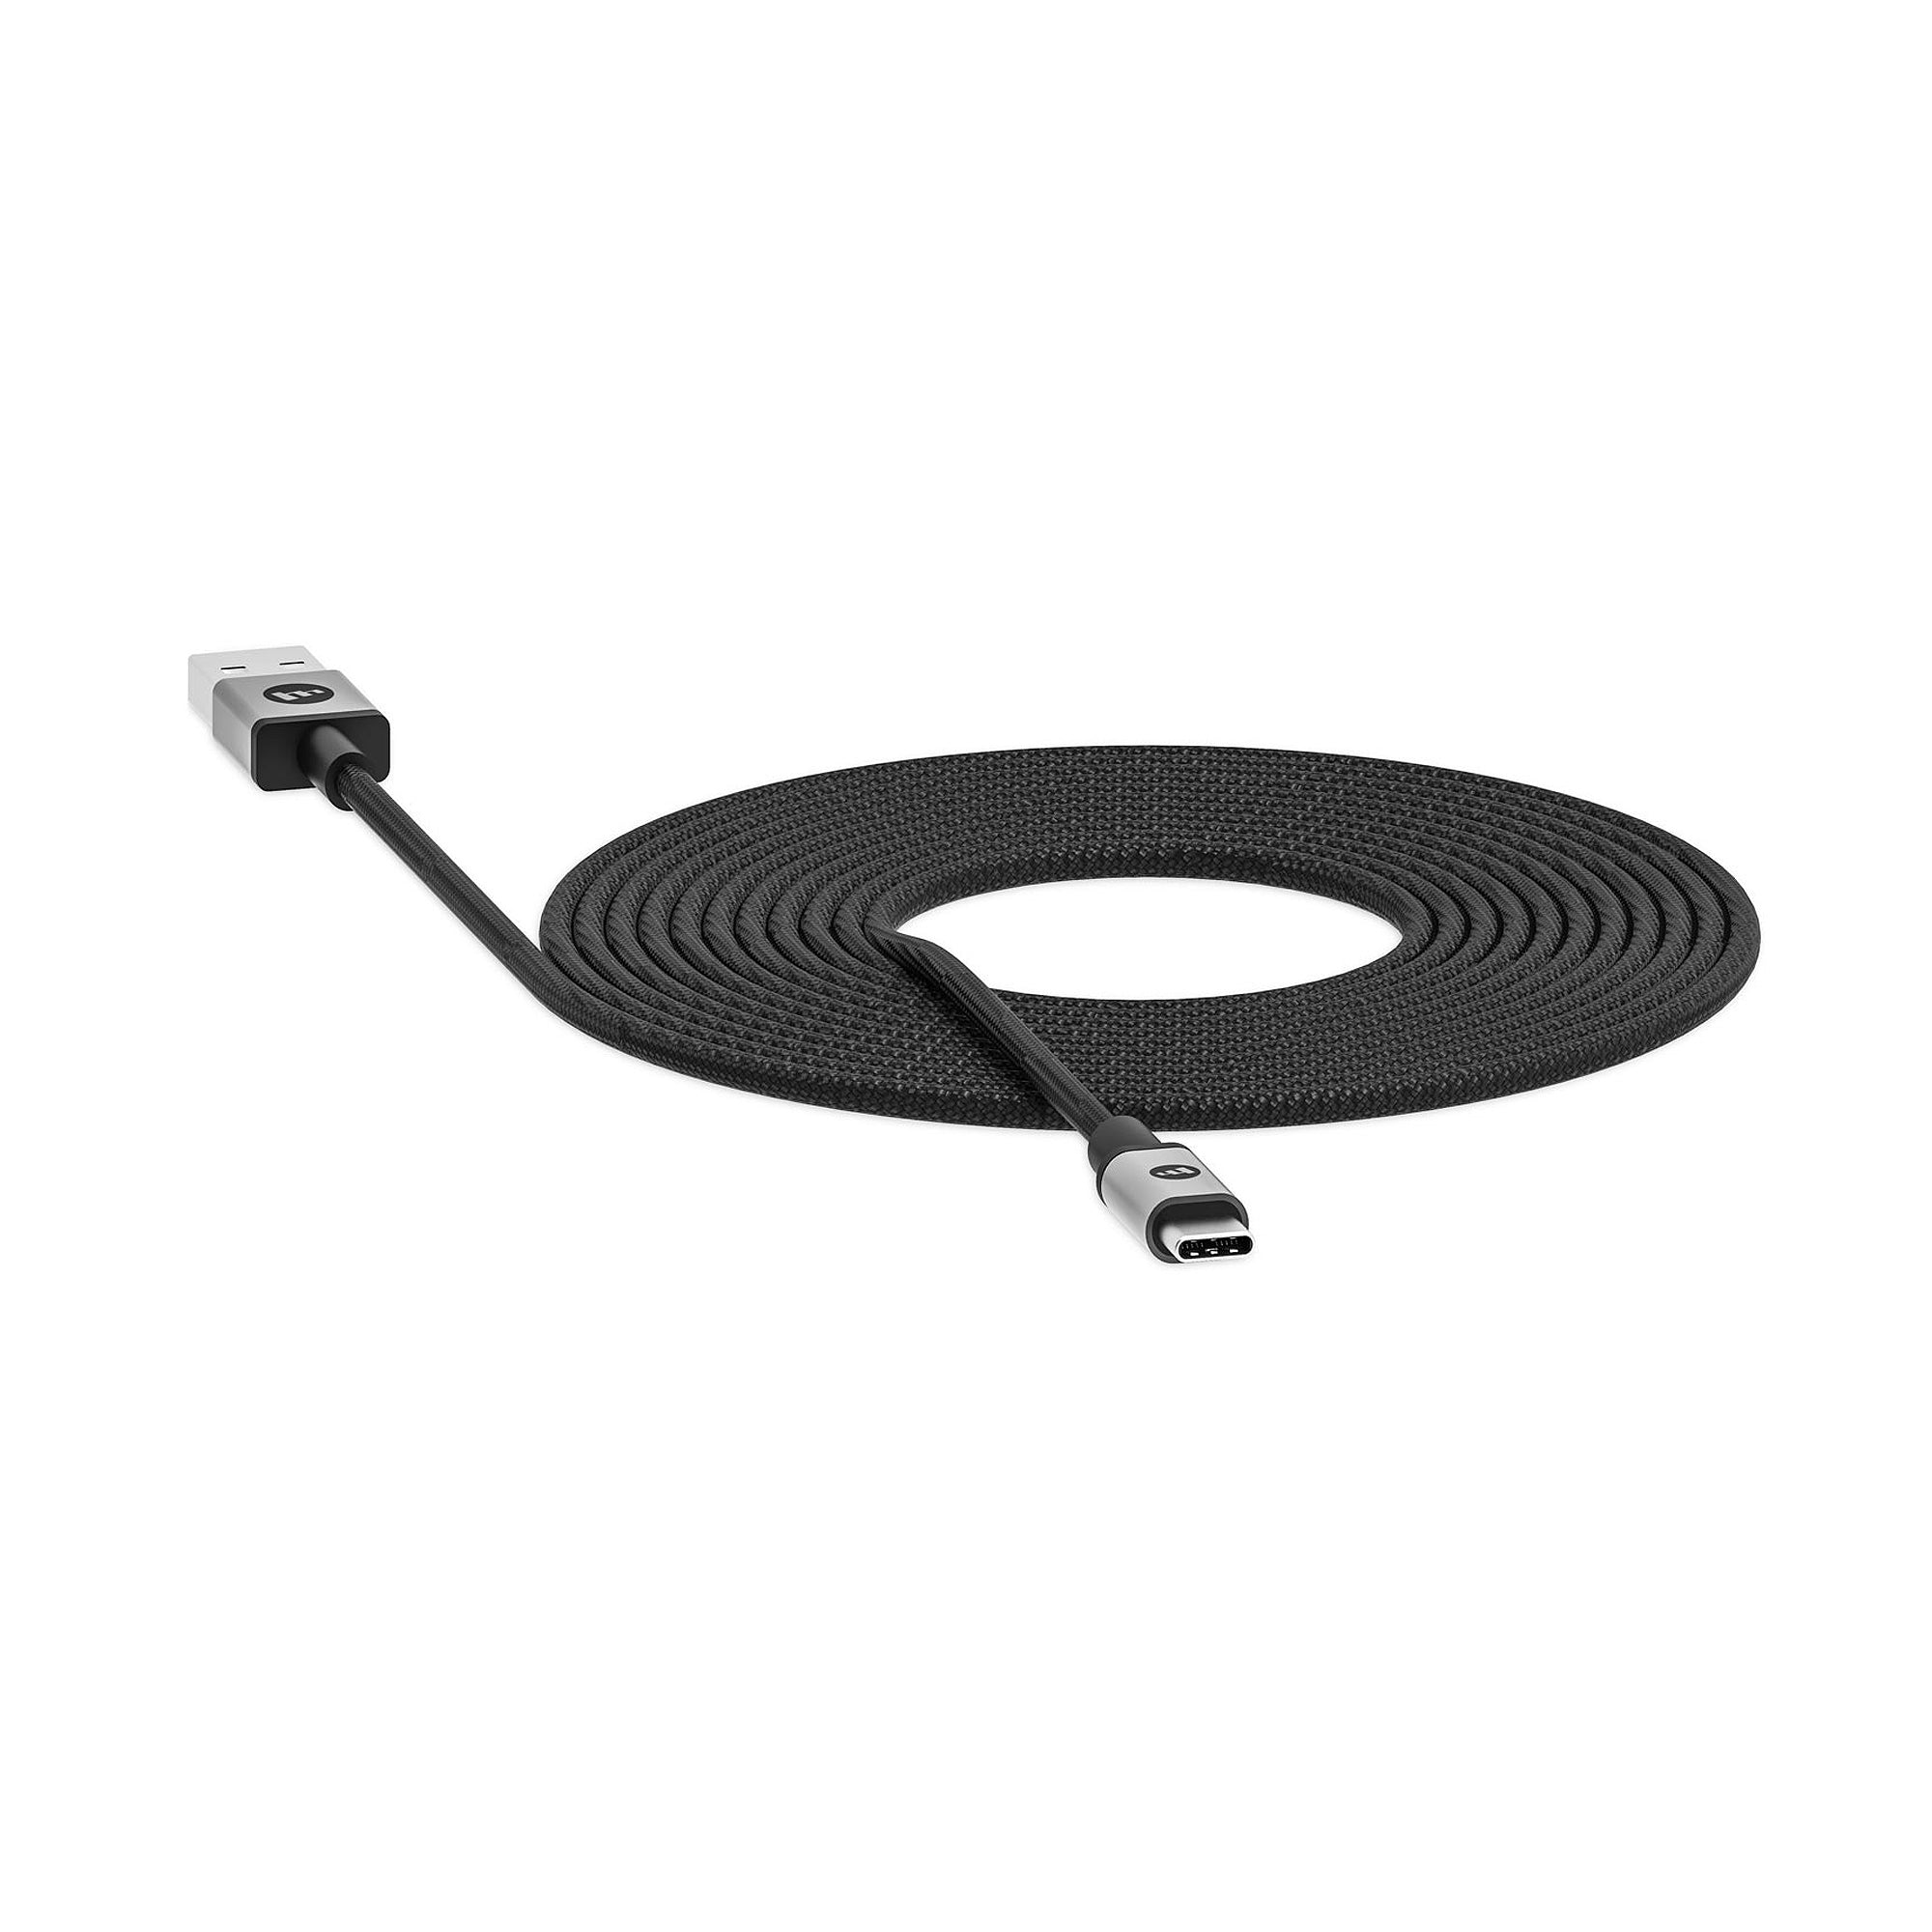 mophie USB-C Cable with USB-C Connector (3m)